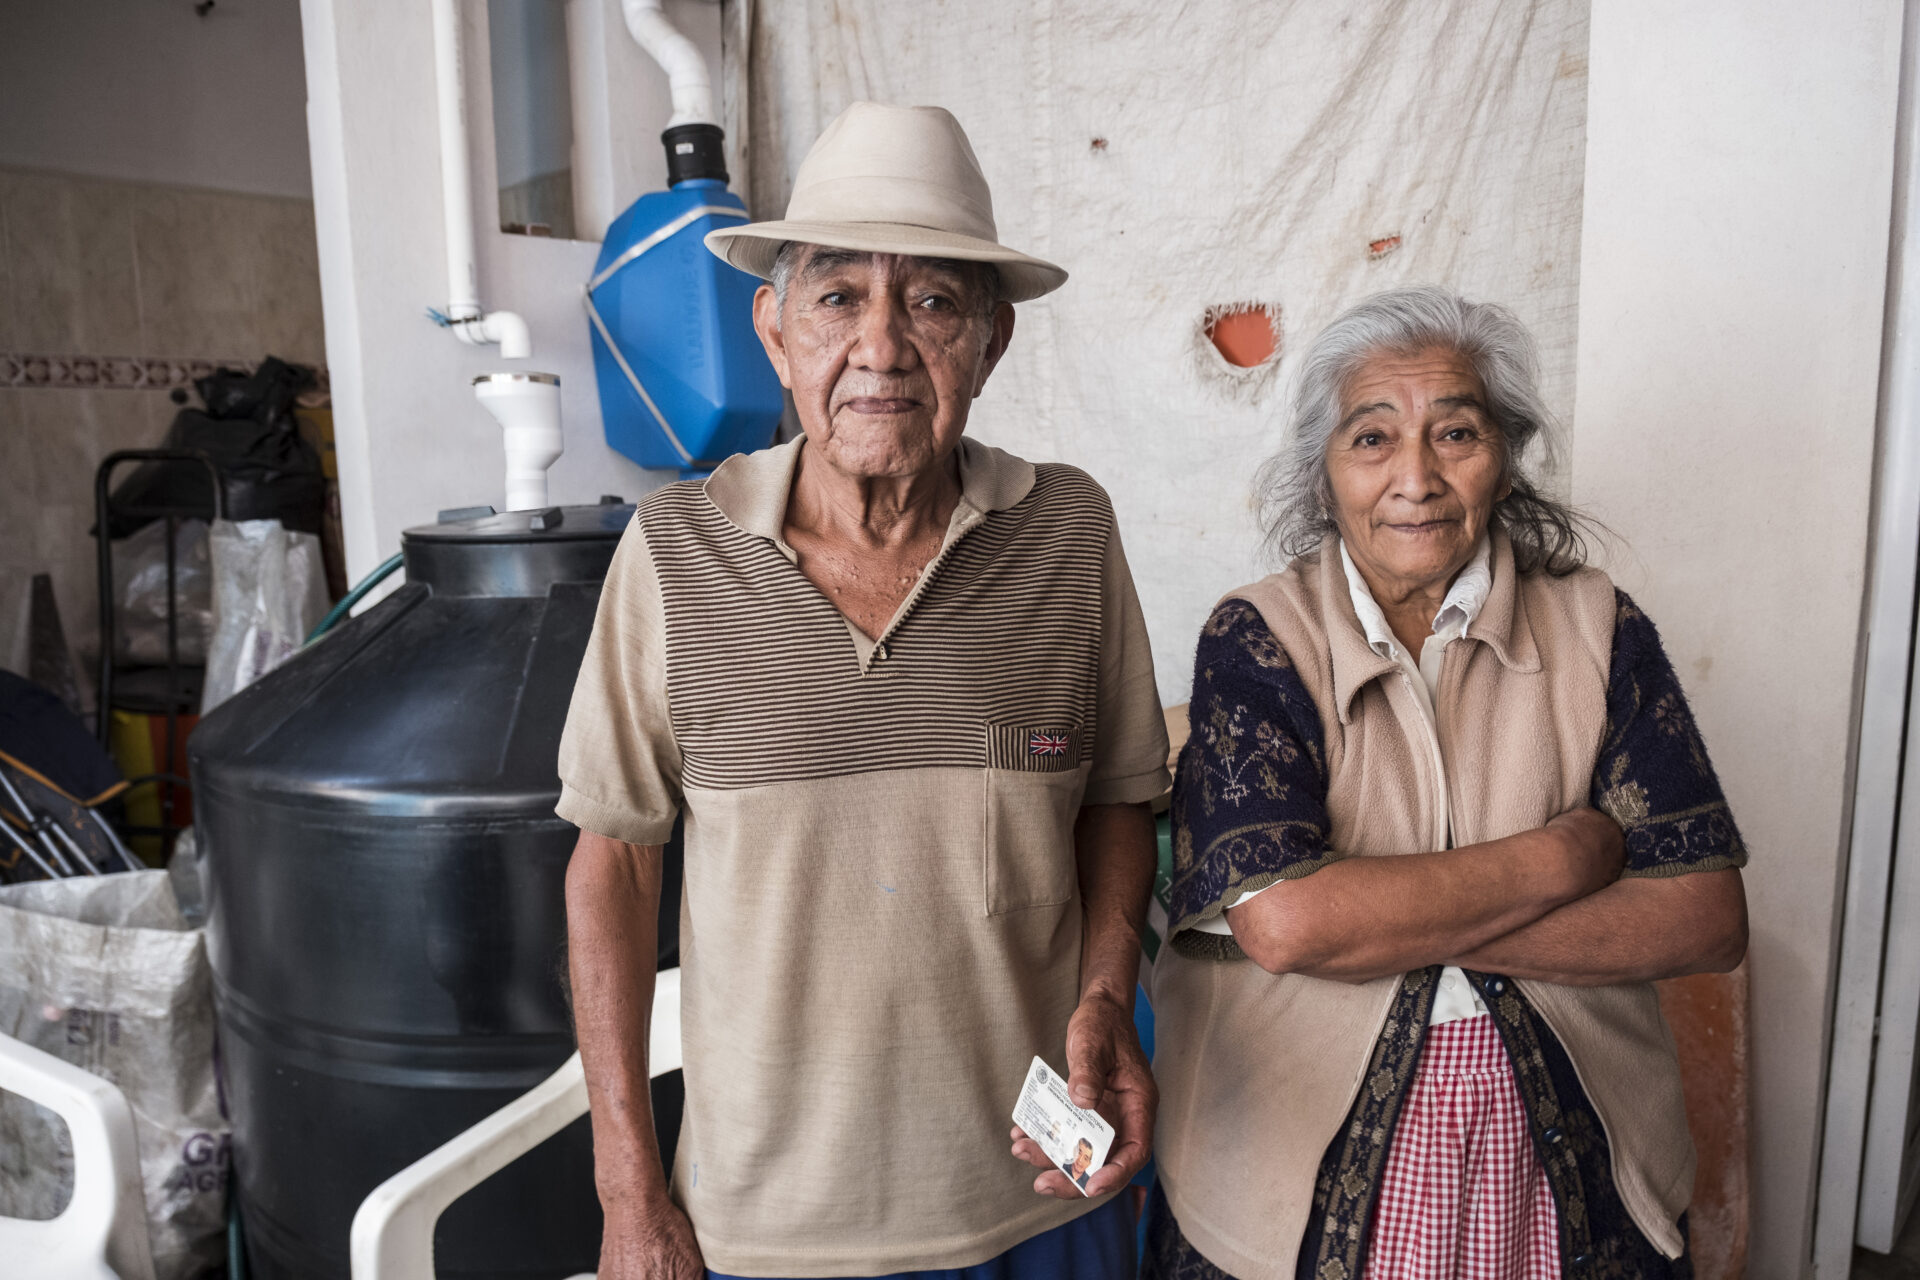 Elderly Couple_Emergency systems installed in Mexico City after earthquake_San Gragorio Xochimilco_Mexico City_Credit Cate Cameron